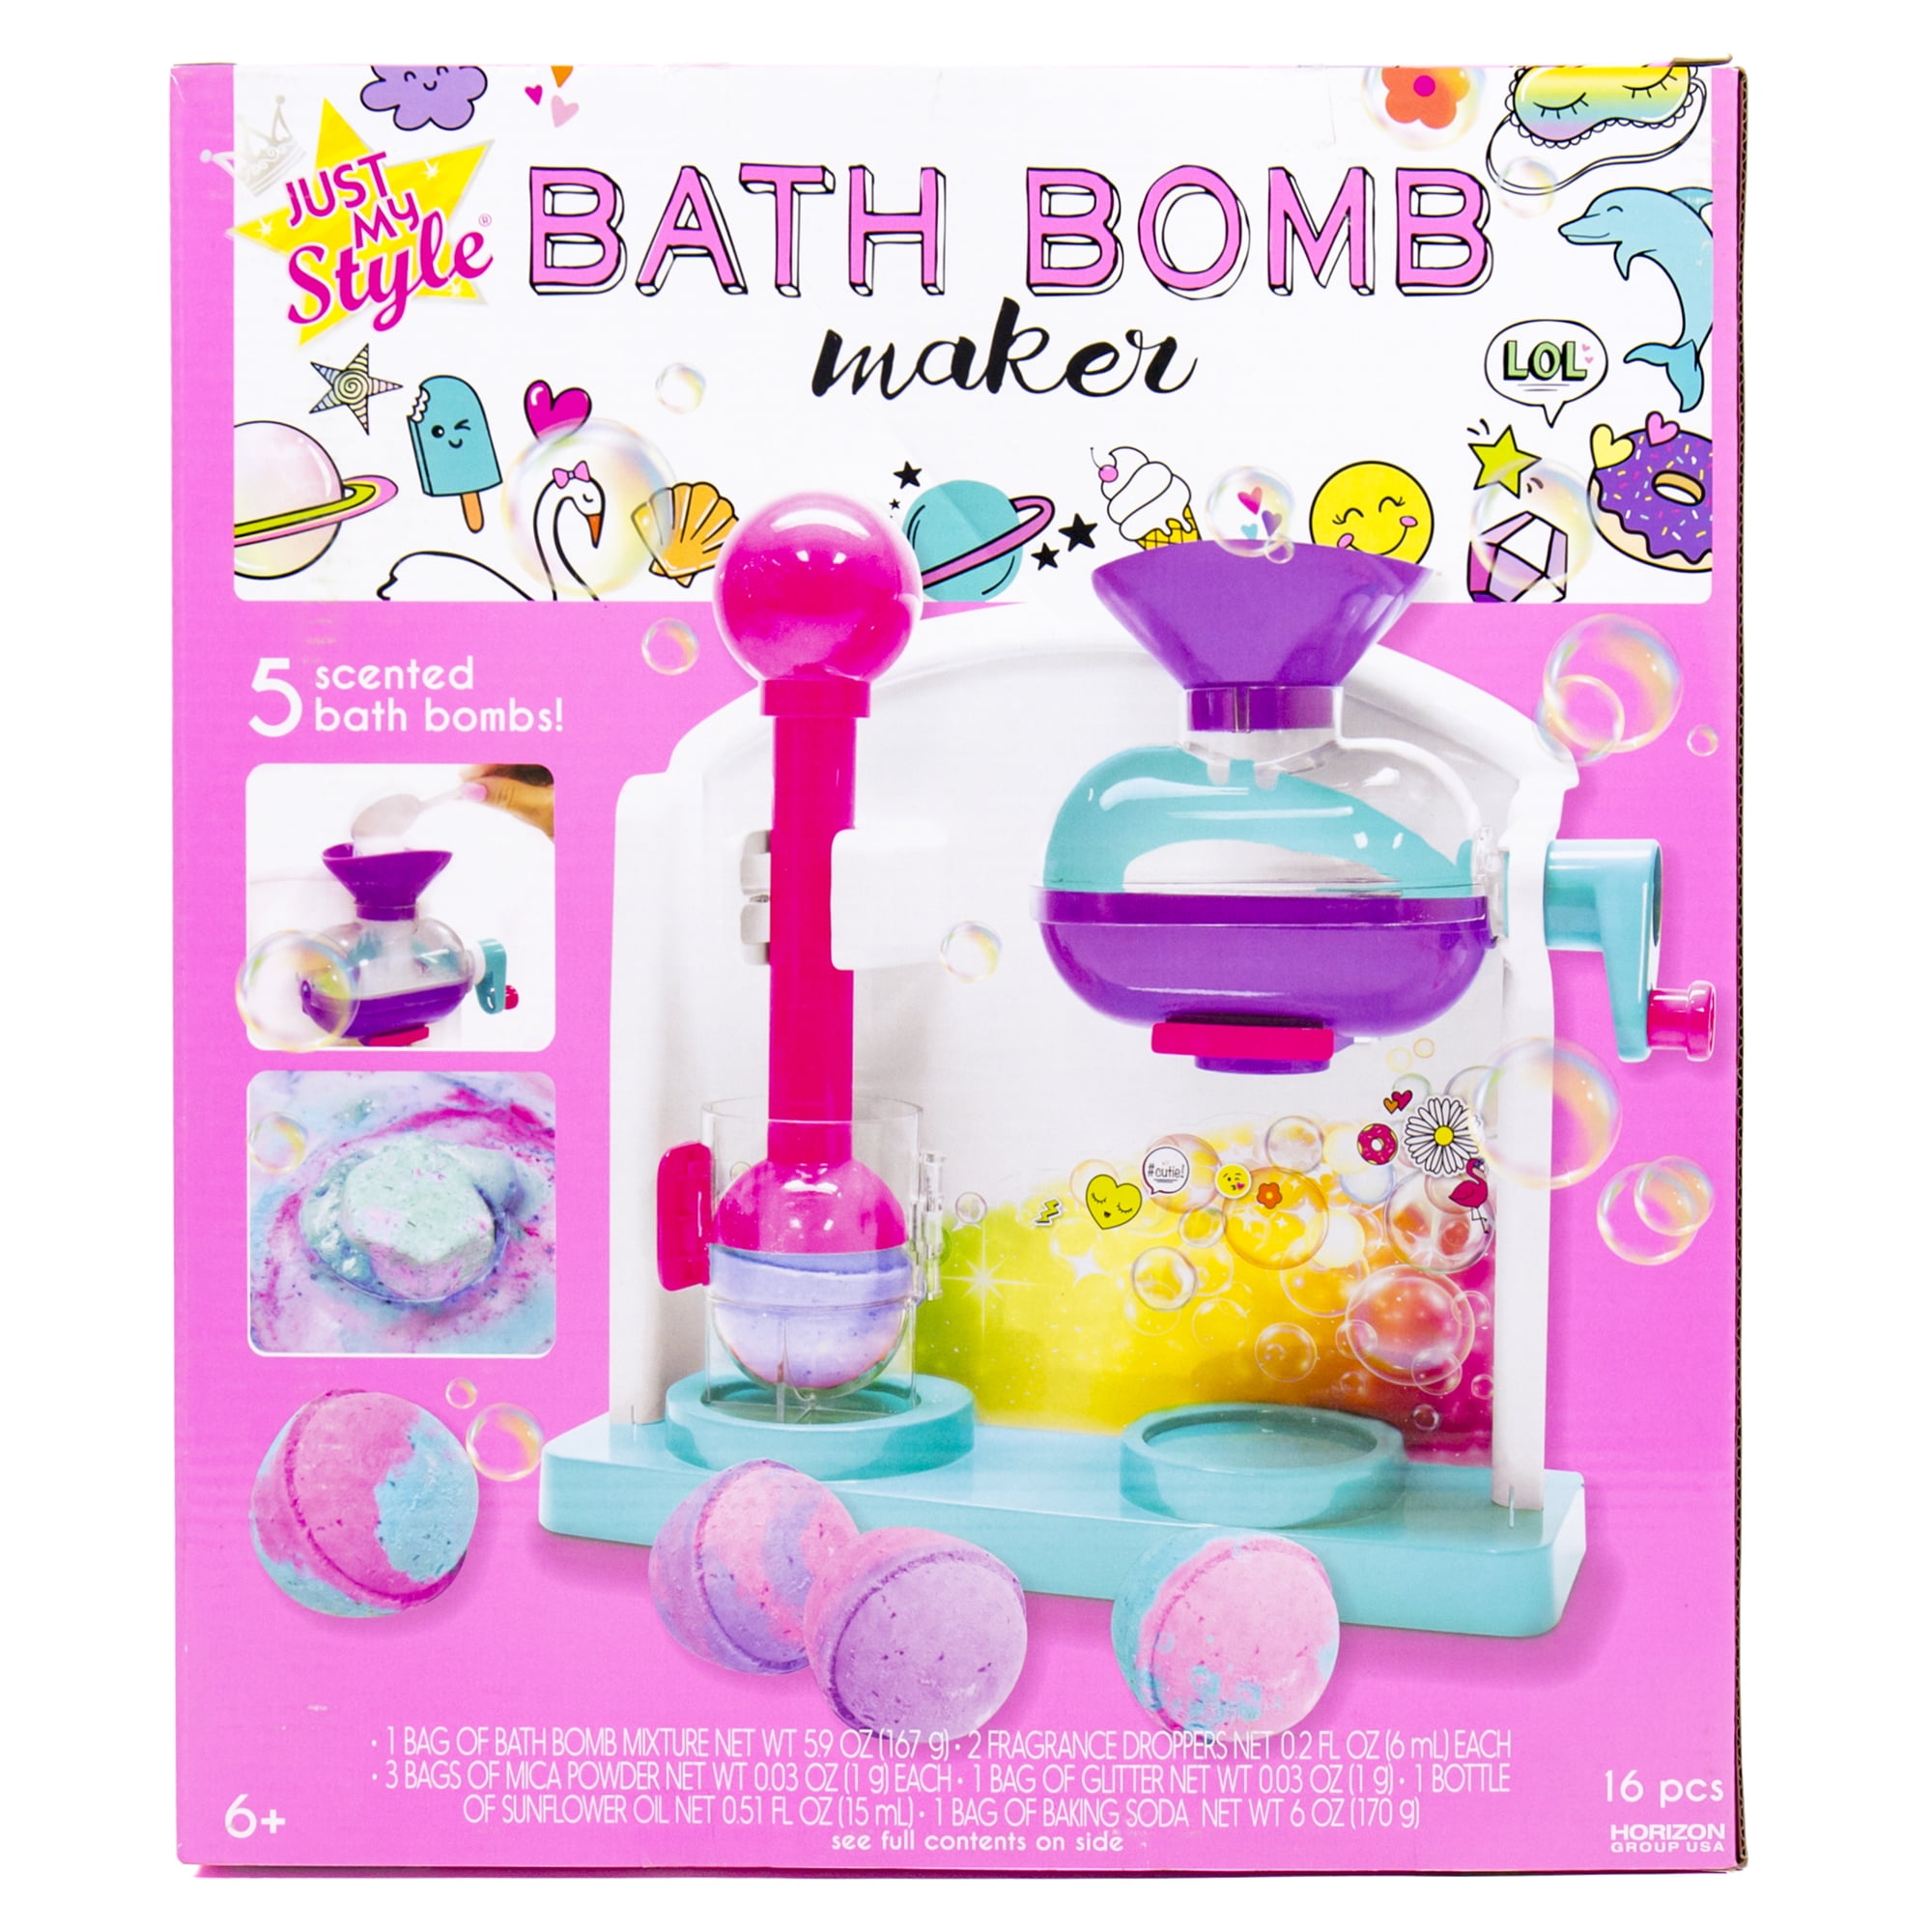 Bath Bomb Secrets the Professionals Don't Want You to Know